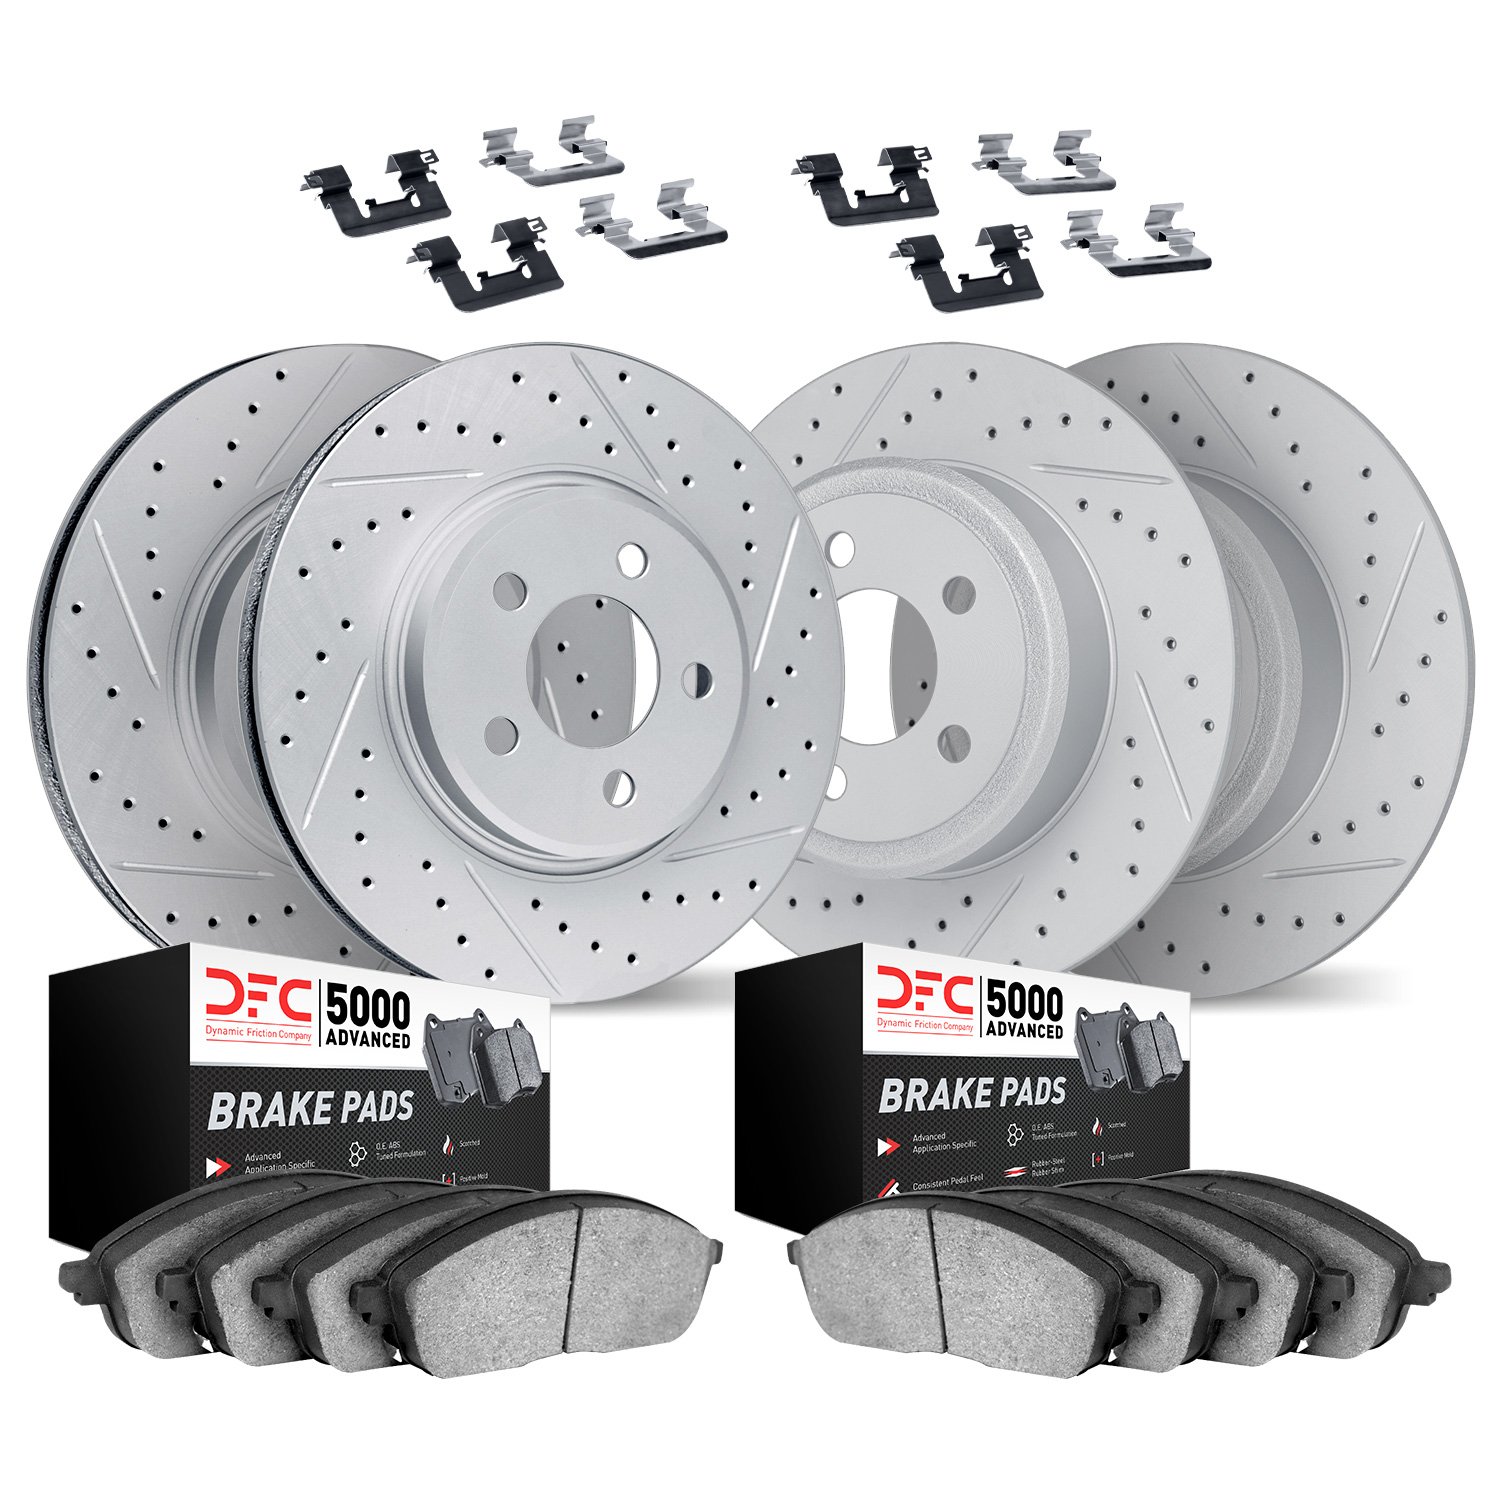 2514-59035 Geoperformance Drilled/Slotted Rotors w/5000 Advanced Brake Pads Kit & Hardware, Fits Select Acura/Honda, Position: F